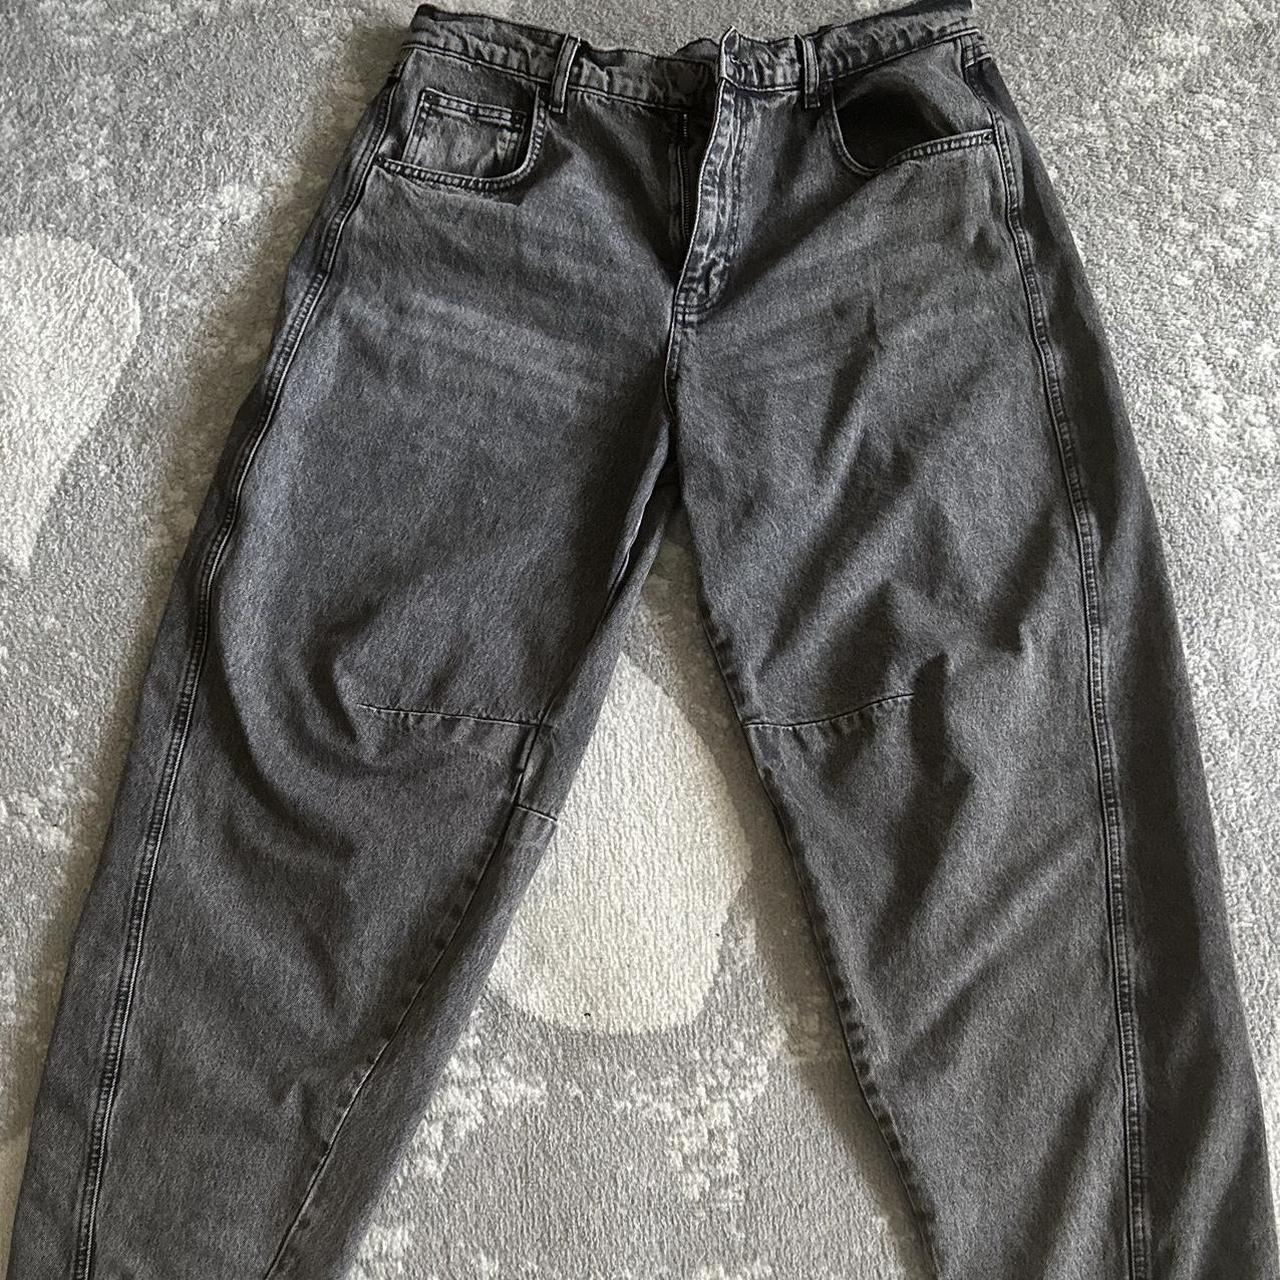 OverSize Jeans 34x36 -Barely Worn -Great condition - Depop